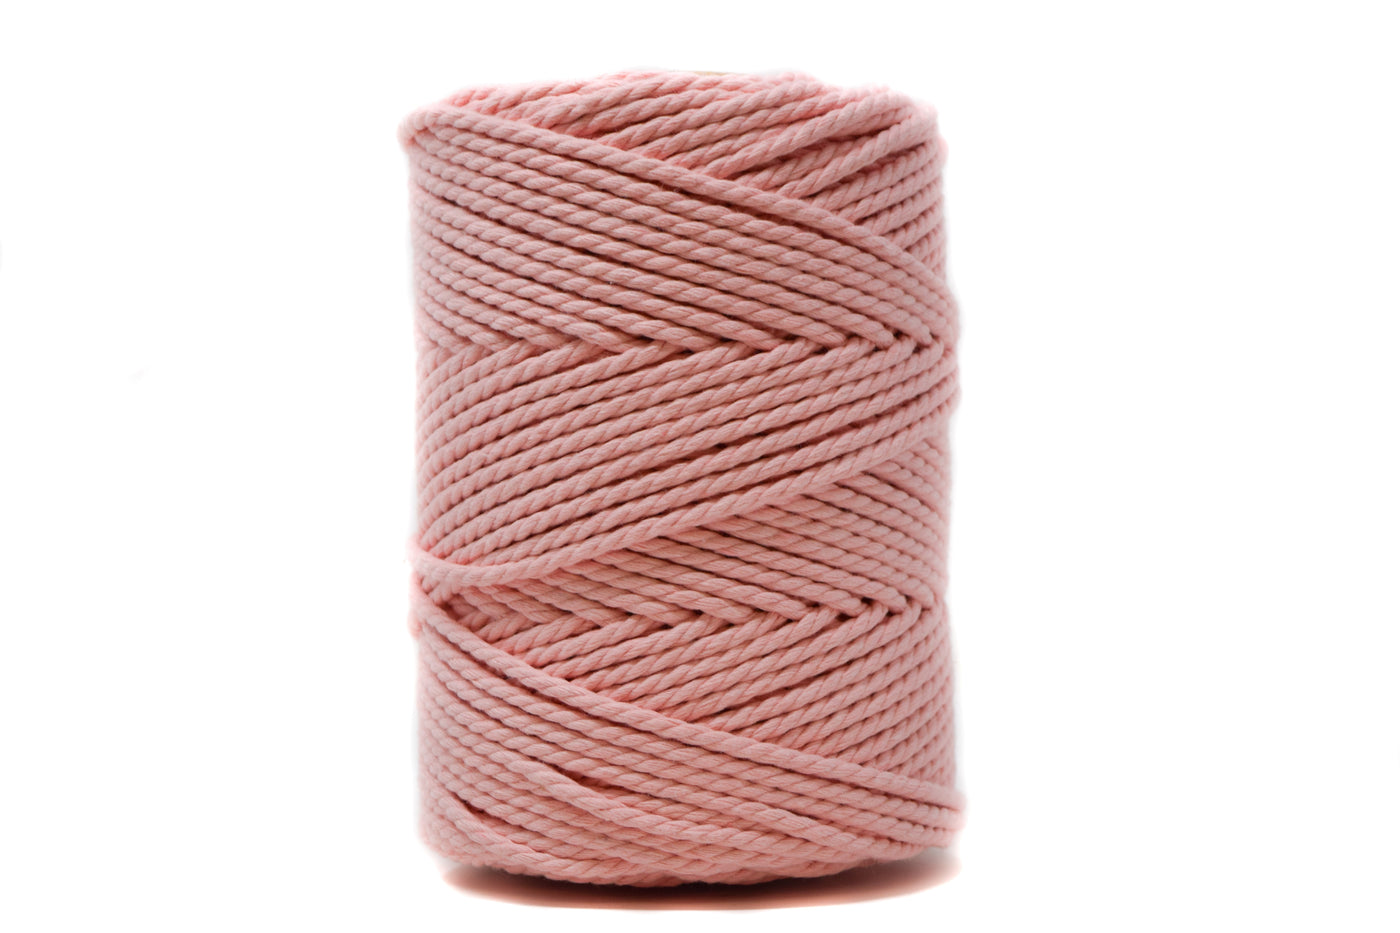 COTTON ROPE ZERO WASTE 3 MM - 3 PLY - CHERRY BLOSSOM PINK COLOR